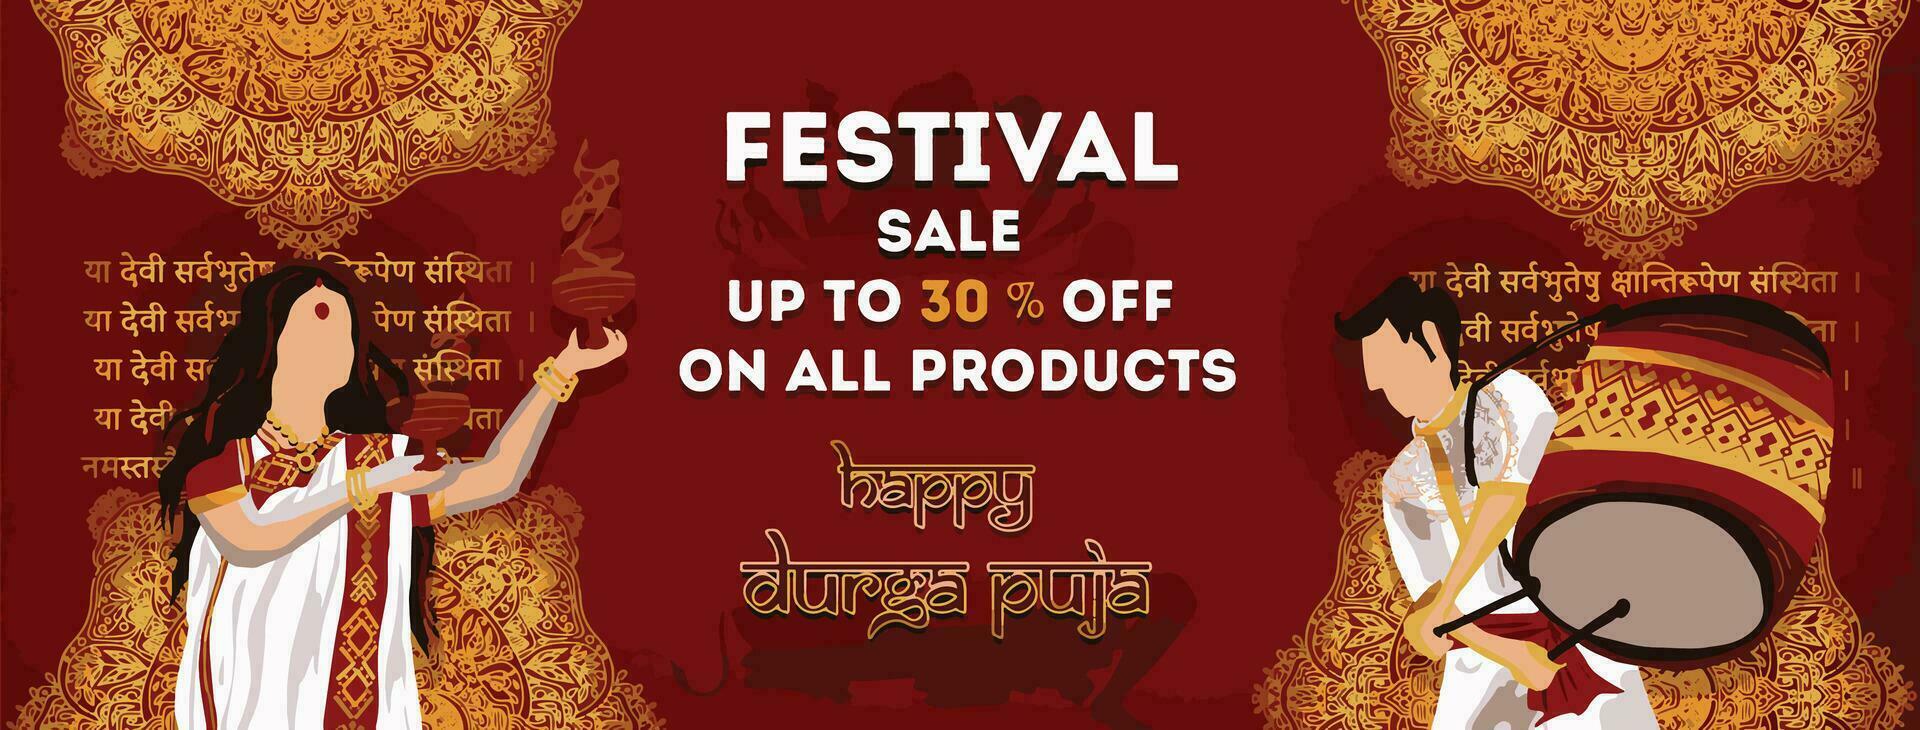 Goddess Maa Durga in Happy Durga Puja, Dussehra, and Navratri Celebration Concept for Web Banner, Poster, Social Media Post, and Flyer Advertising vector